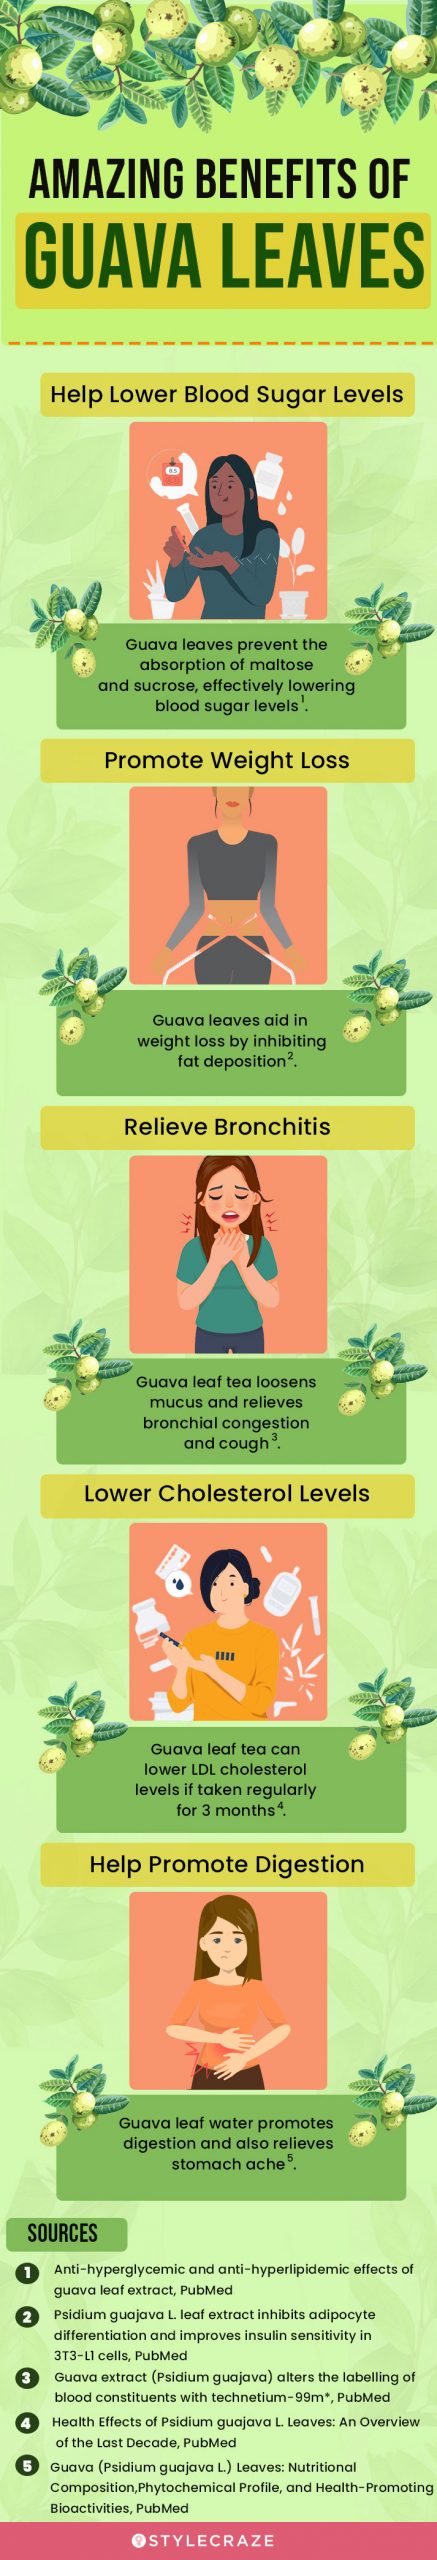 amazing benefits of guava leaves (infographic)